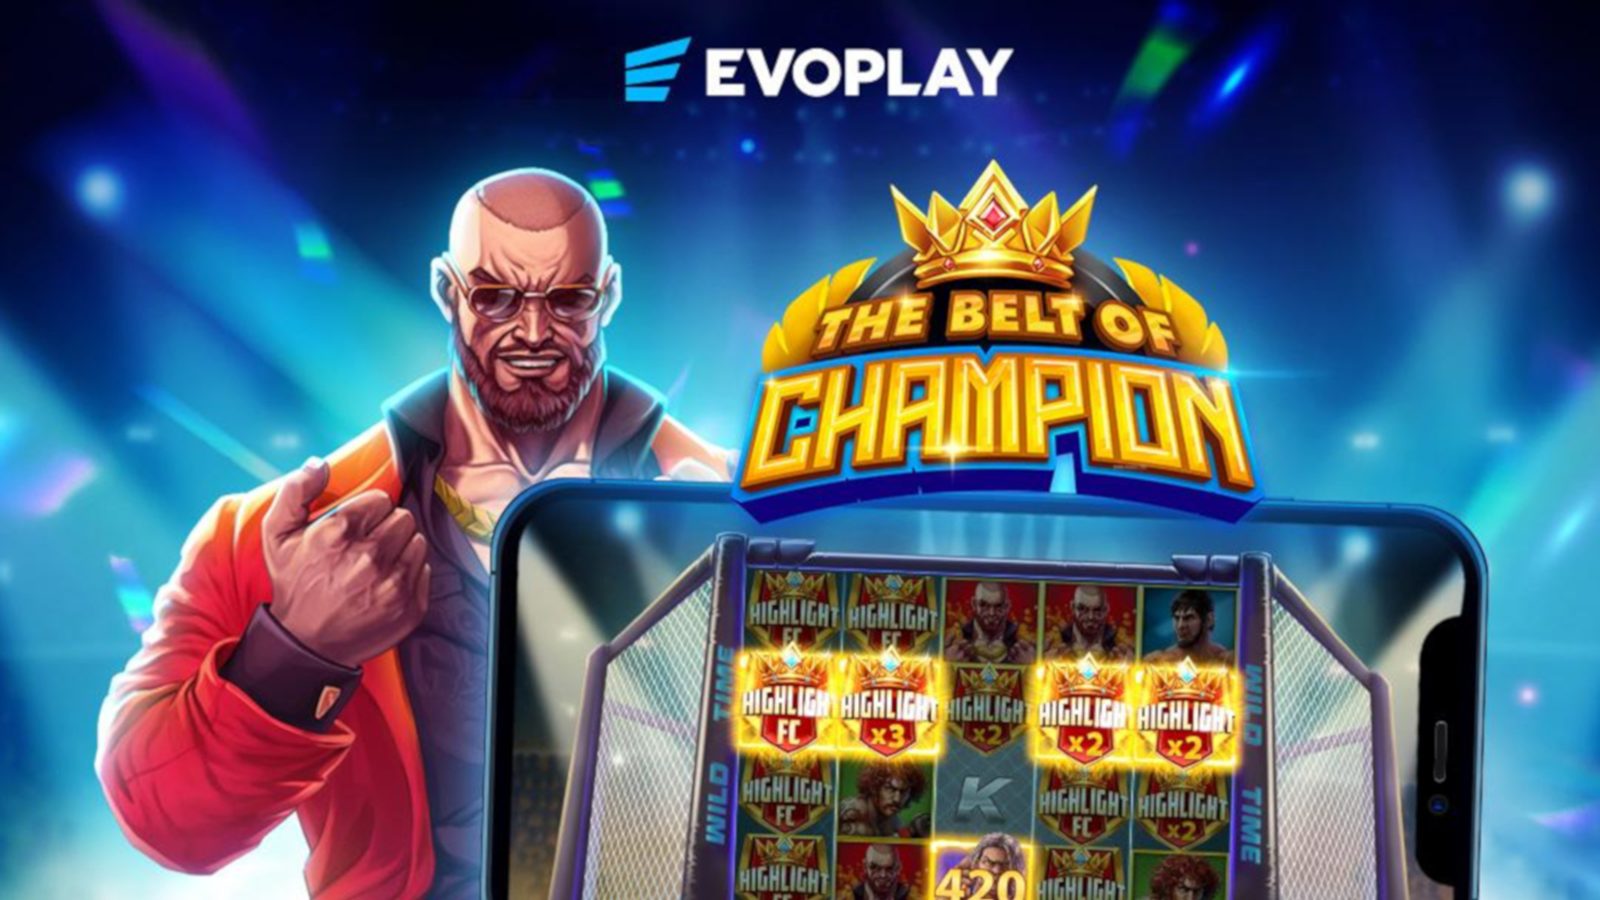 Evoplay - The Belt of Champion